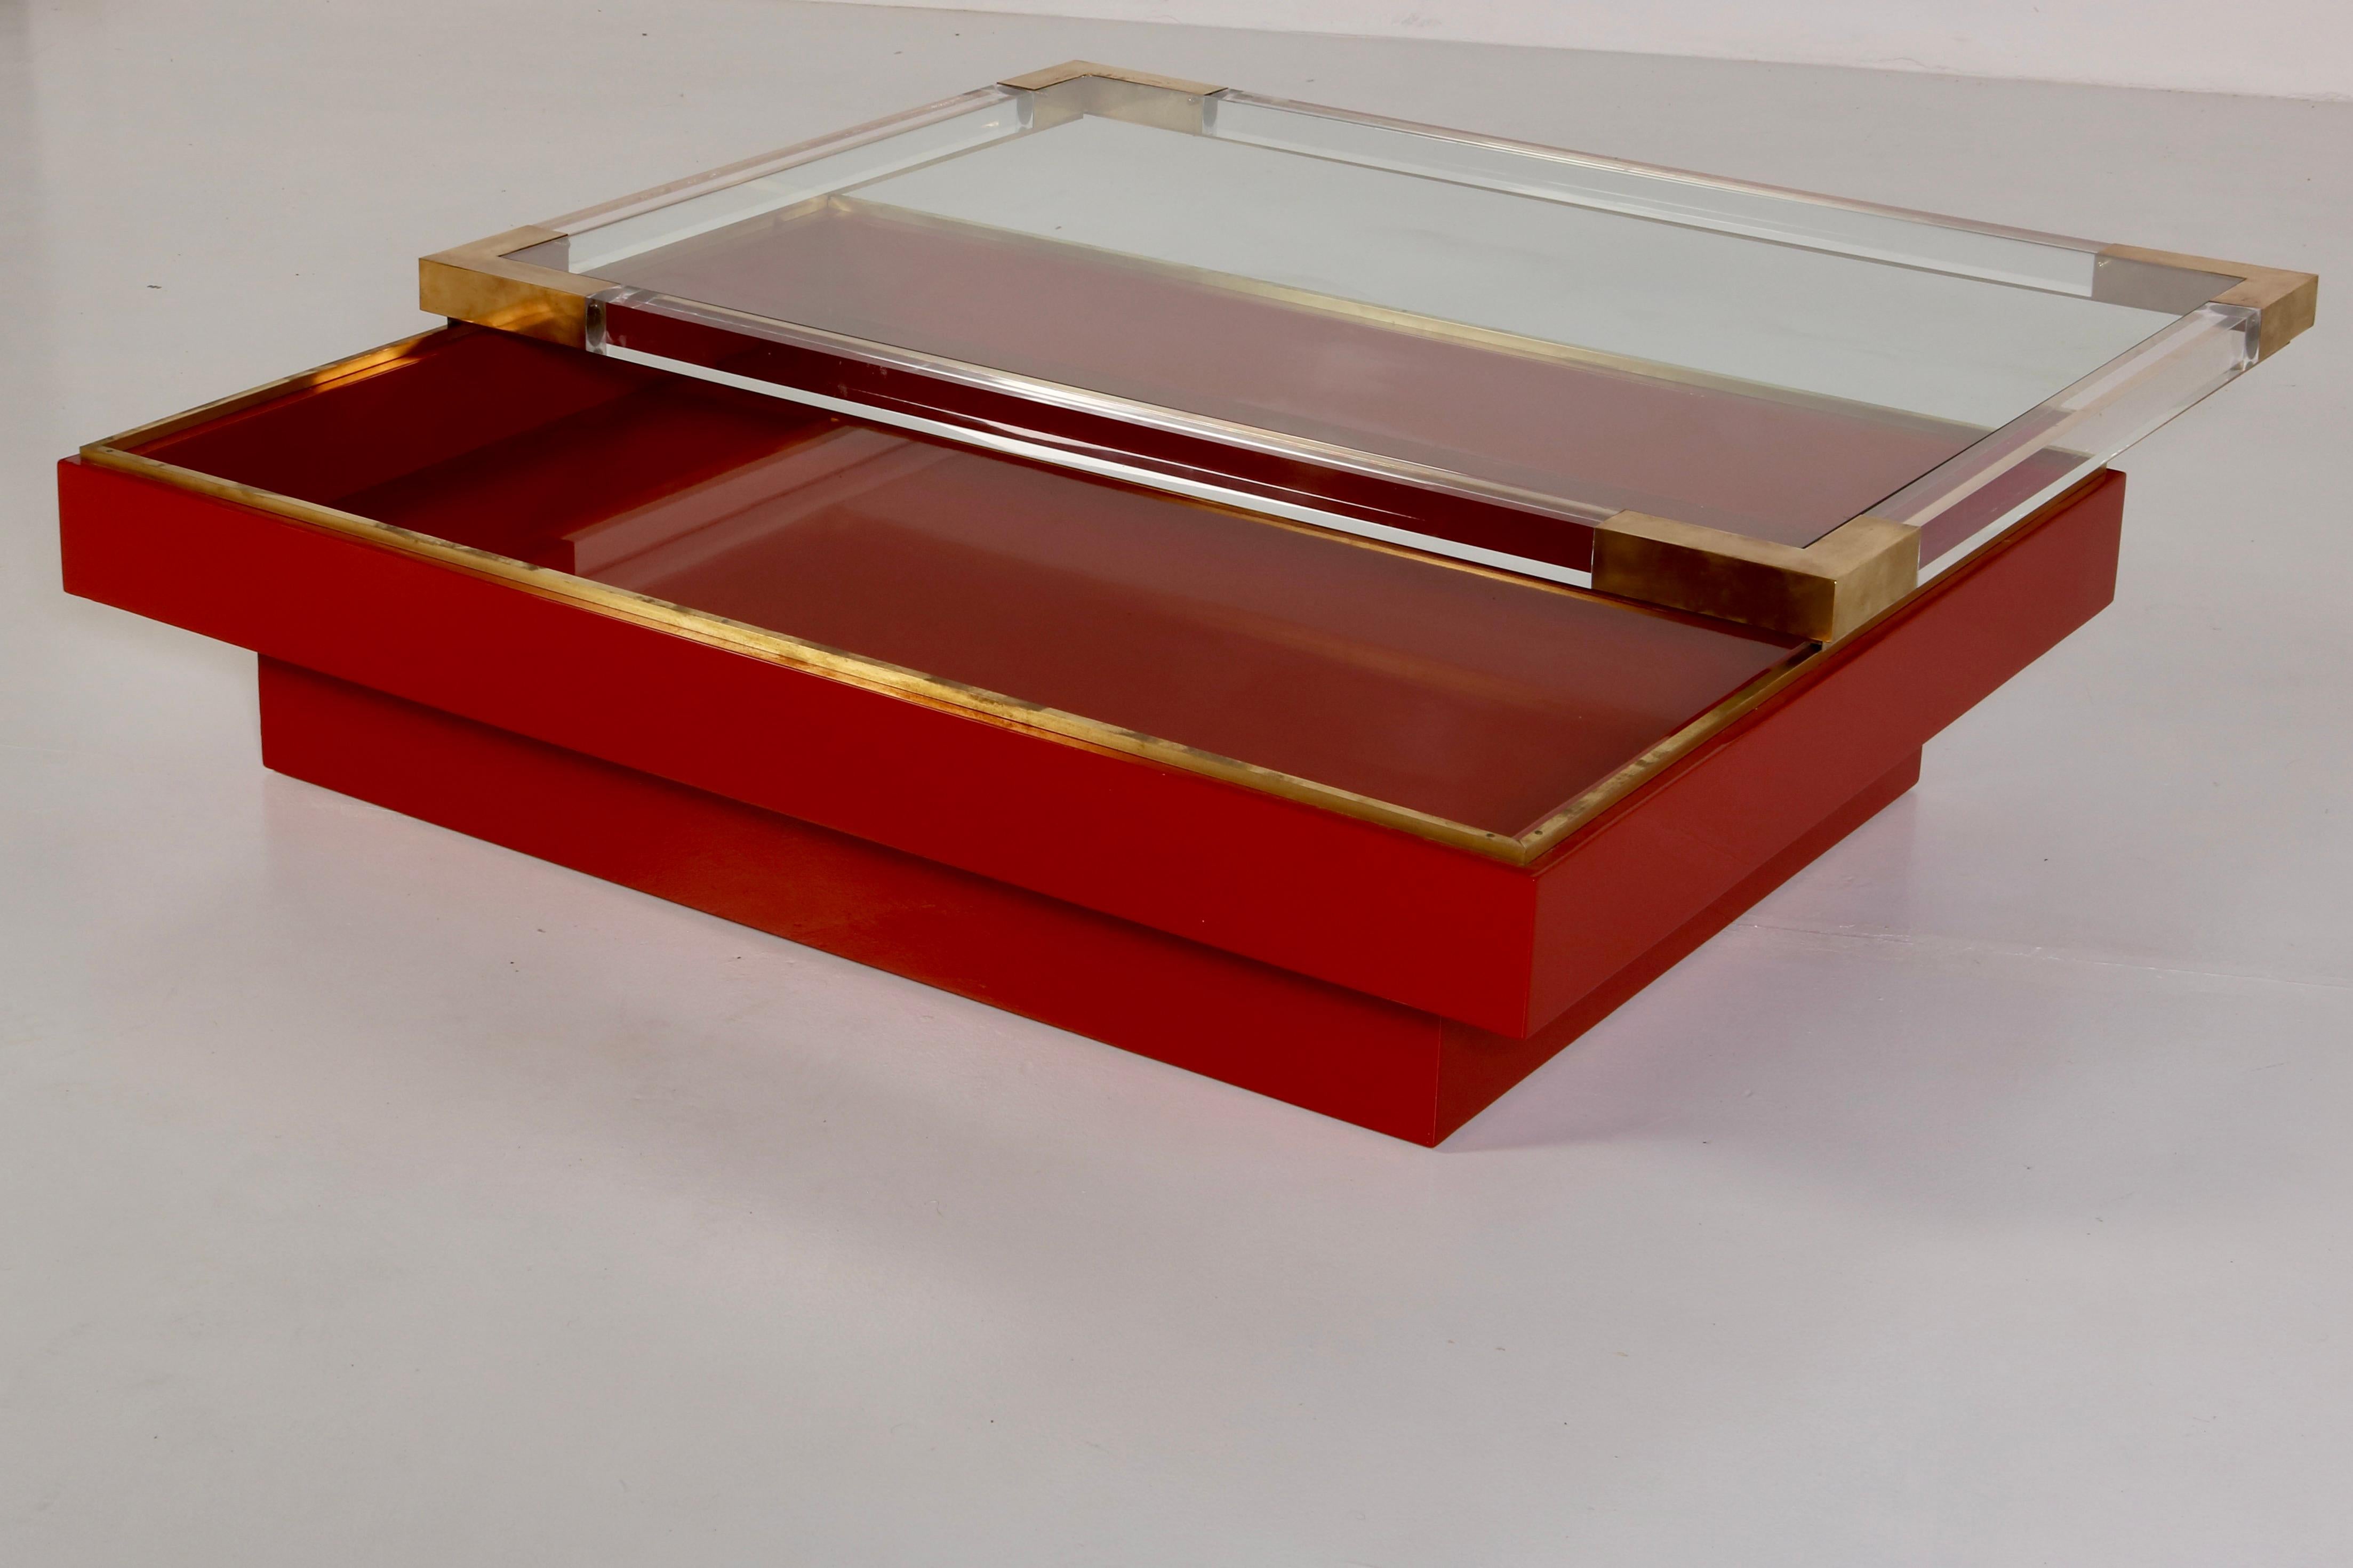 Brass Stunning Sliding Top Low Table in Red and Gold by Romeo Rega, Italian Design 70s For Sale